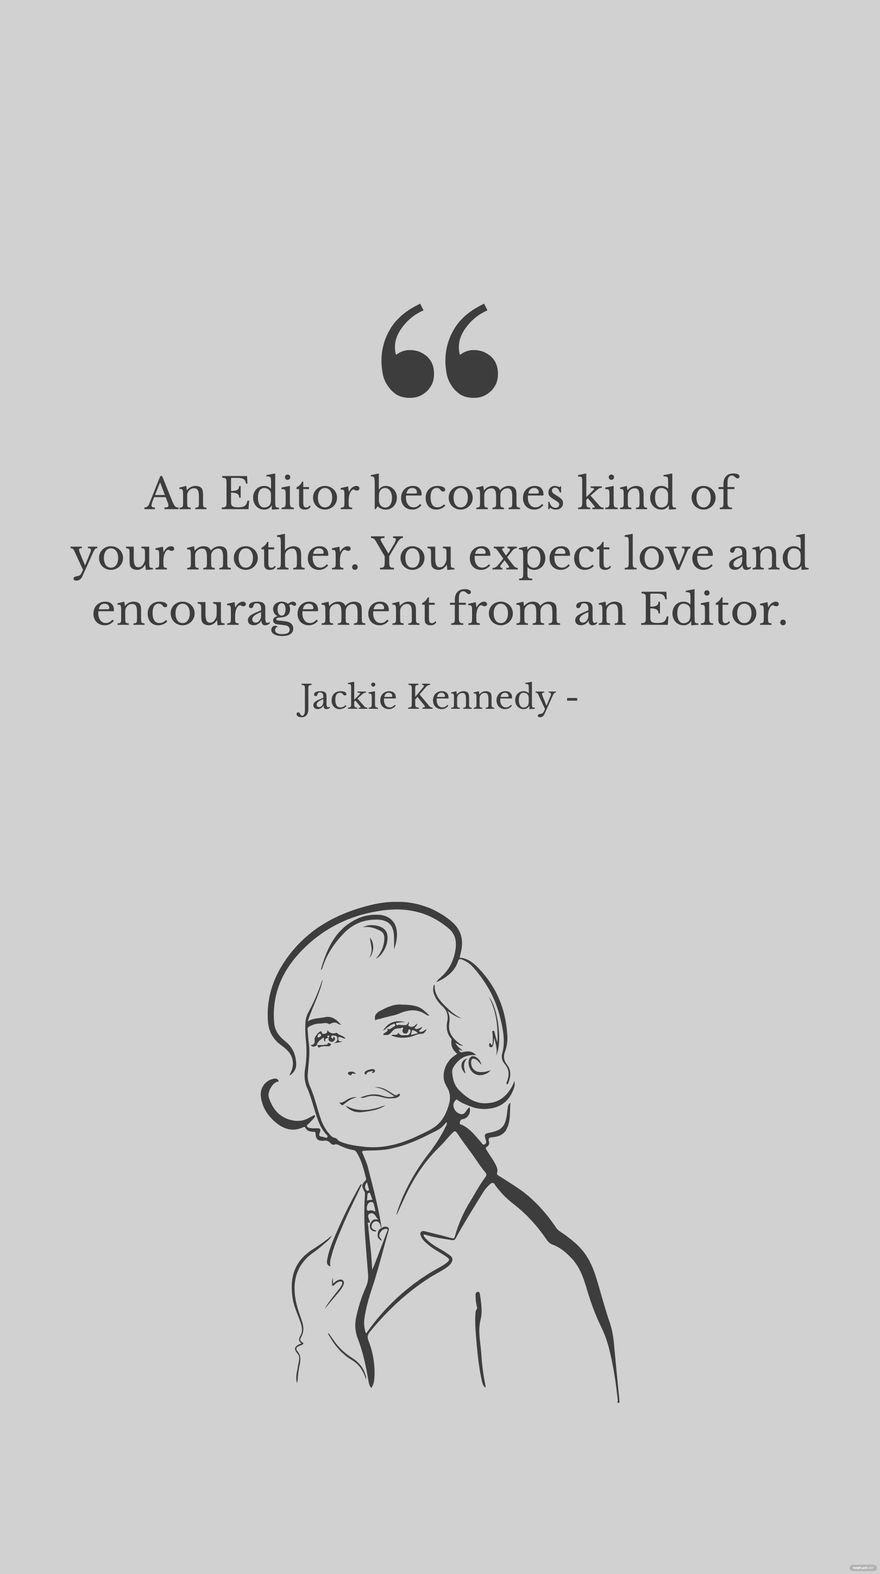 Free Jackie Kennedy - An Editor becomes kind of your mother. You expect love and encouragement from an Editor. in JPG